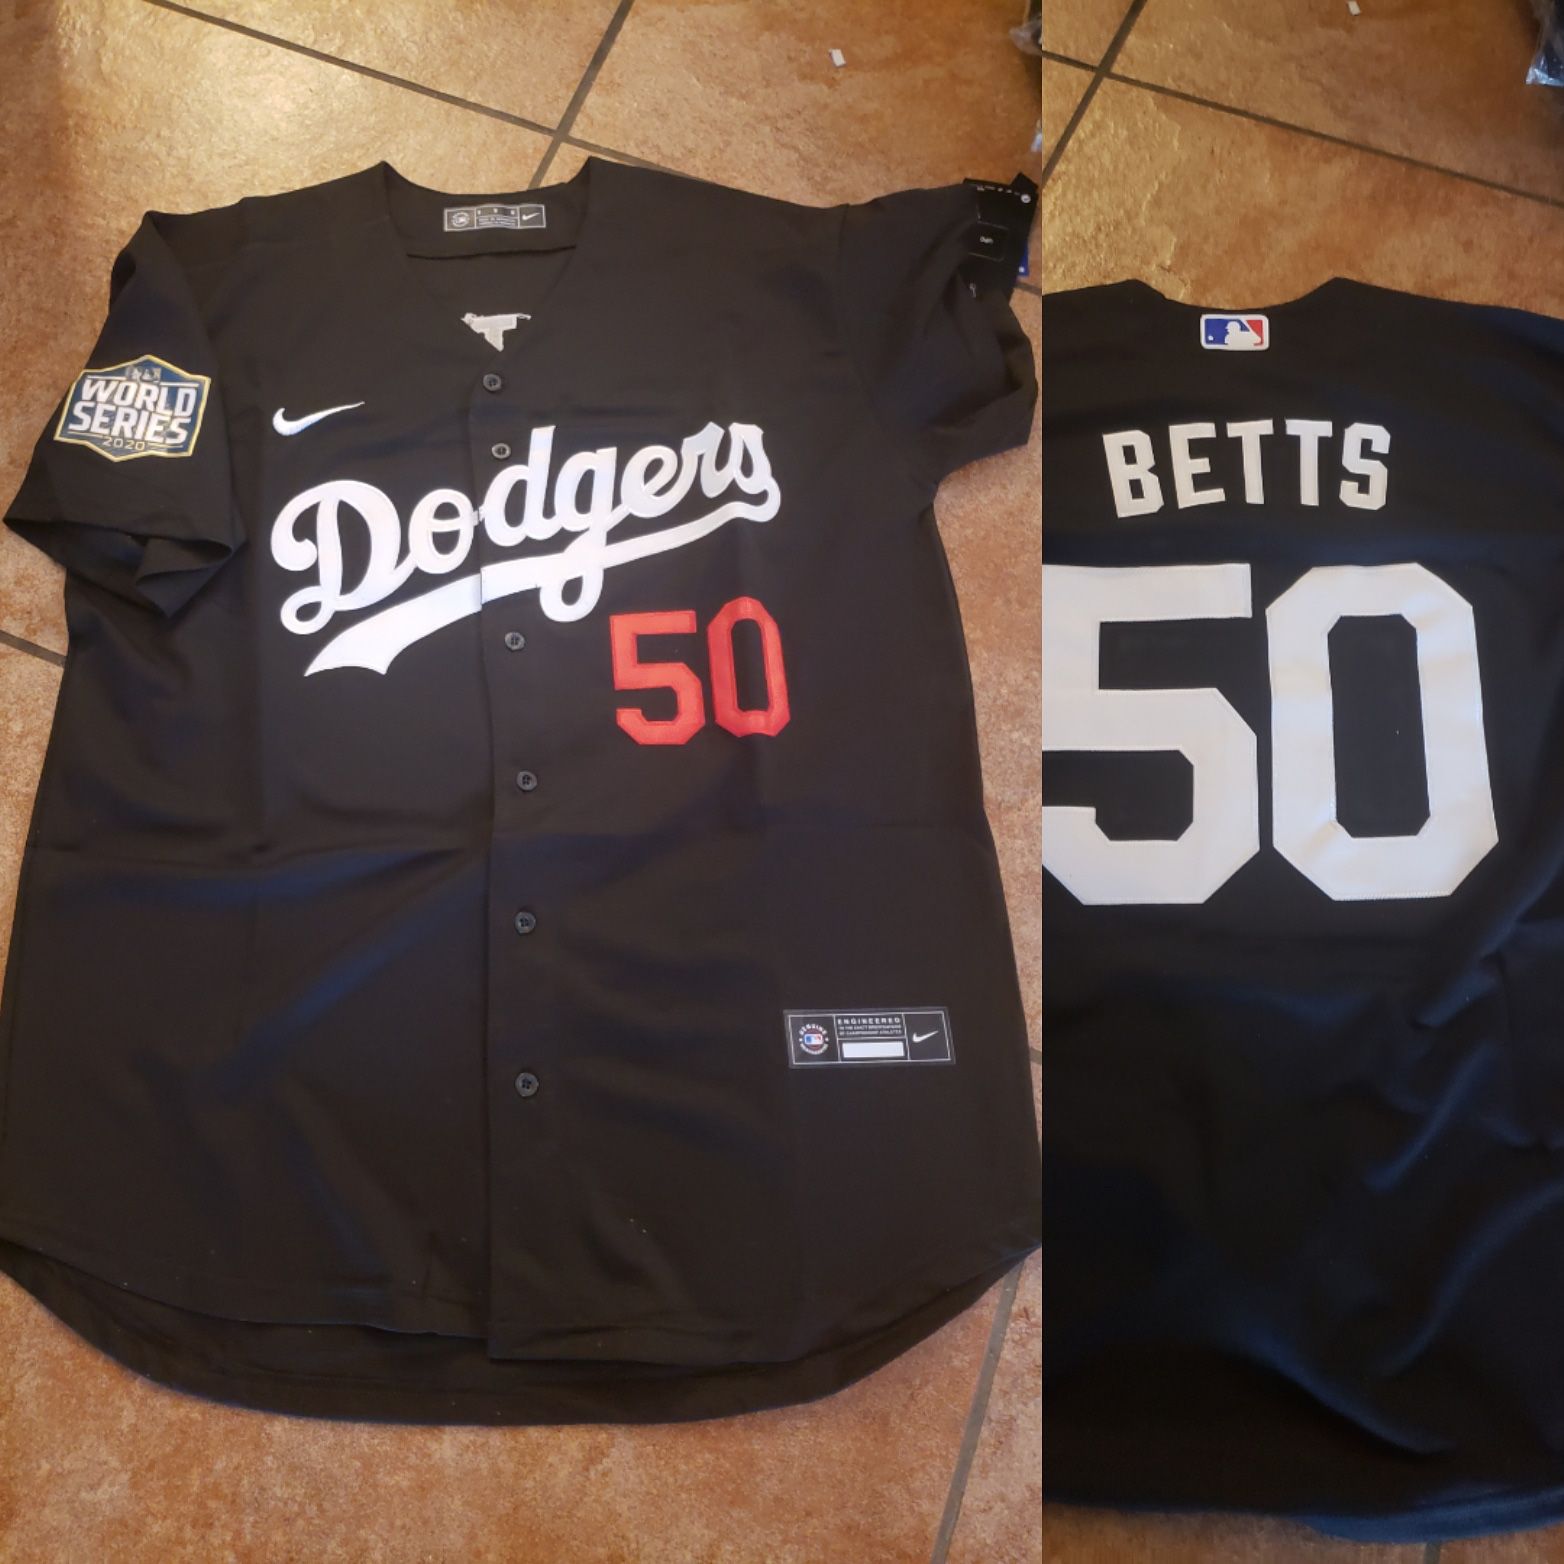 Dodgers betts jersey with World Series patch sizes small to 3xl stitched firm price pick up only